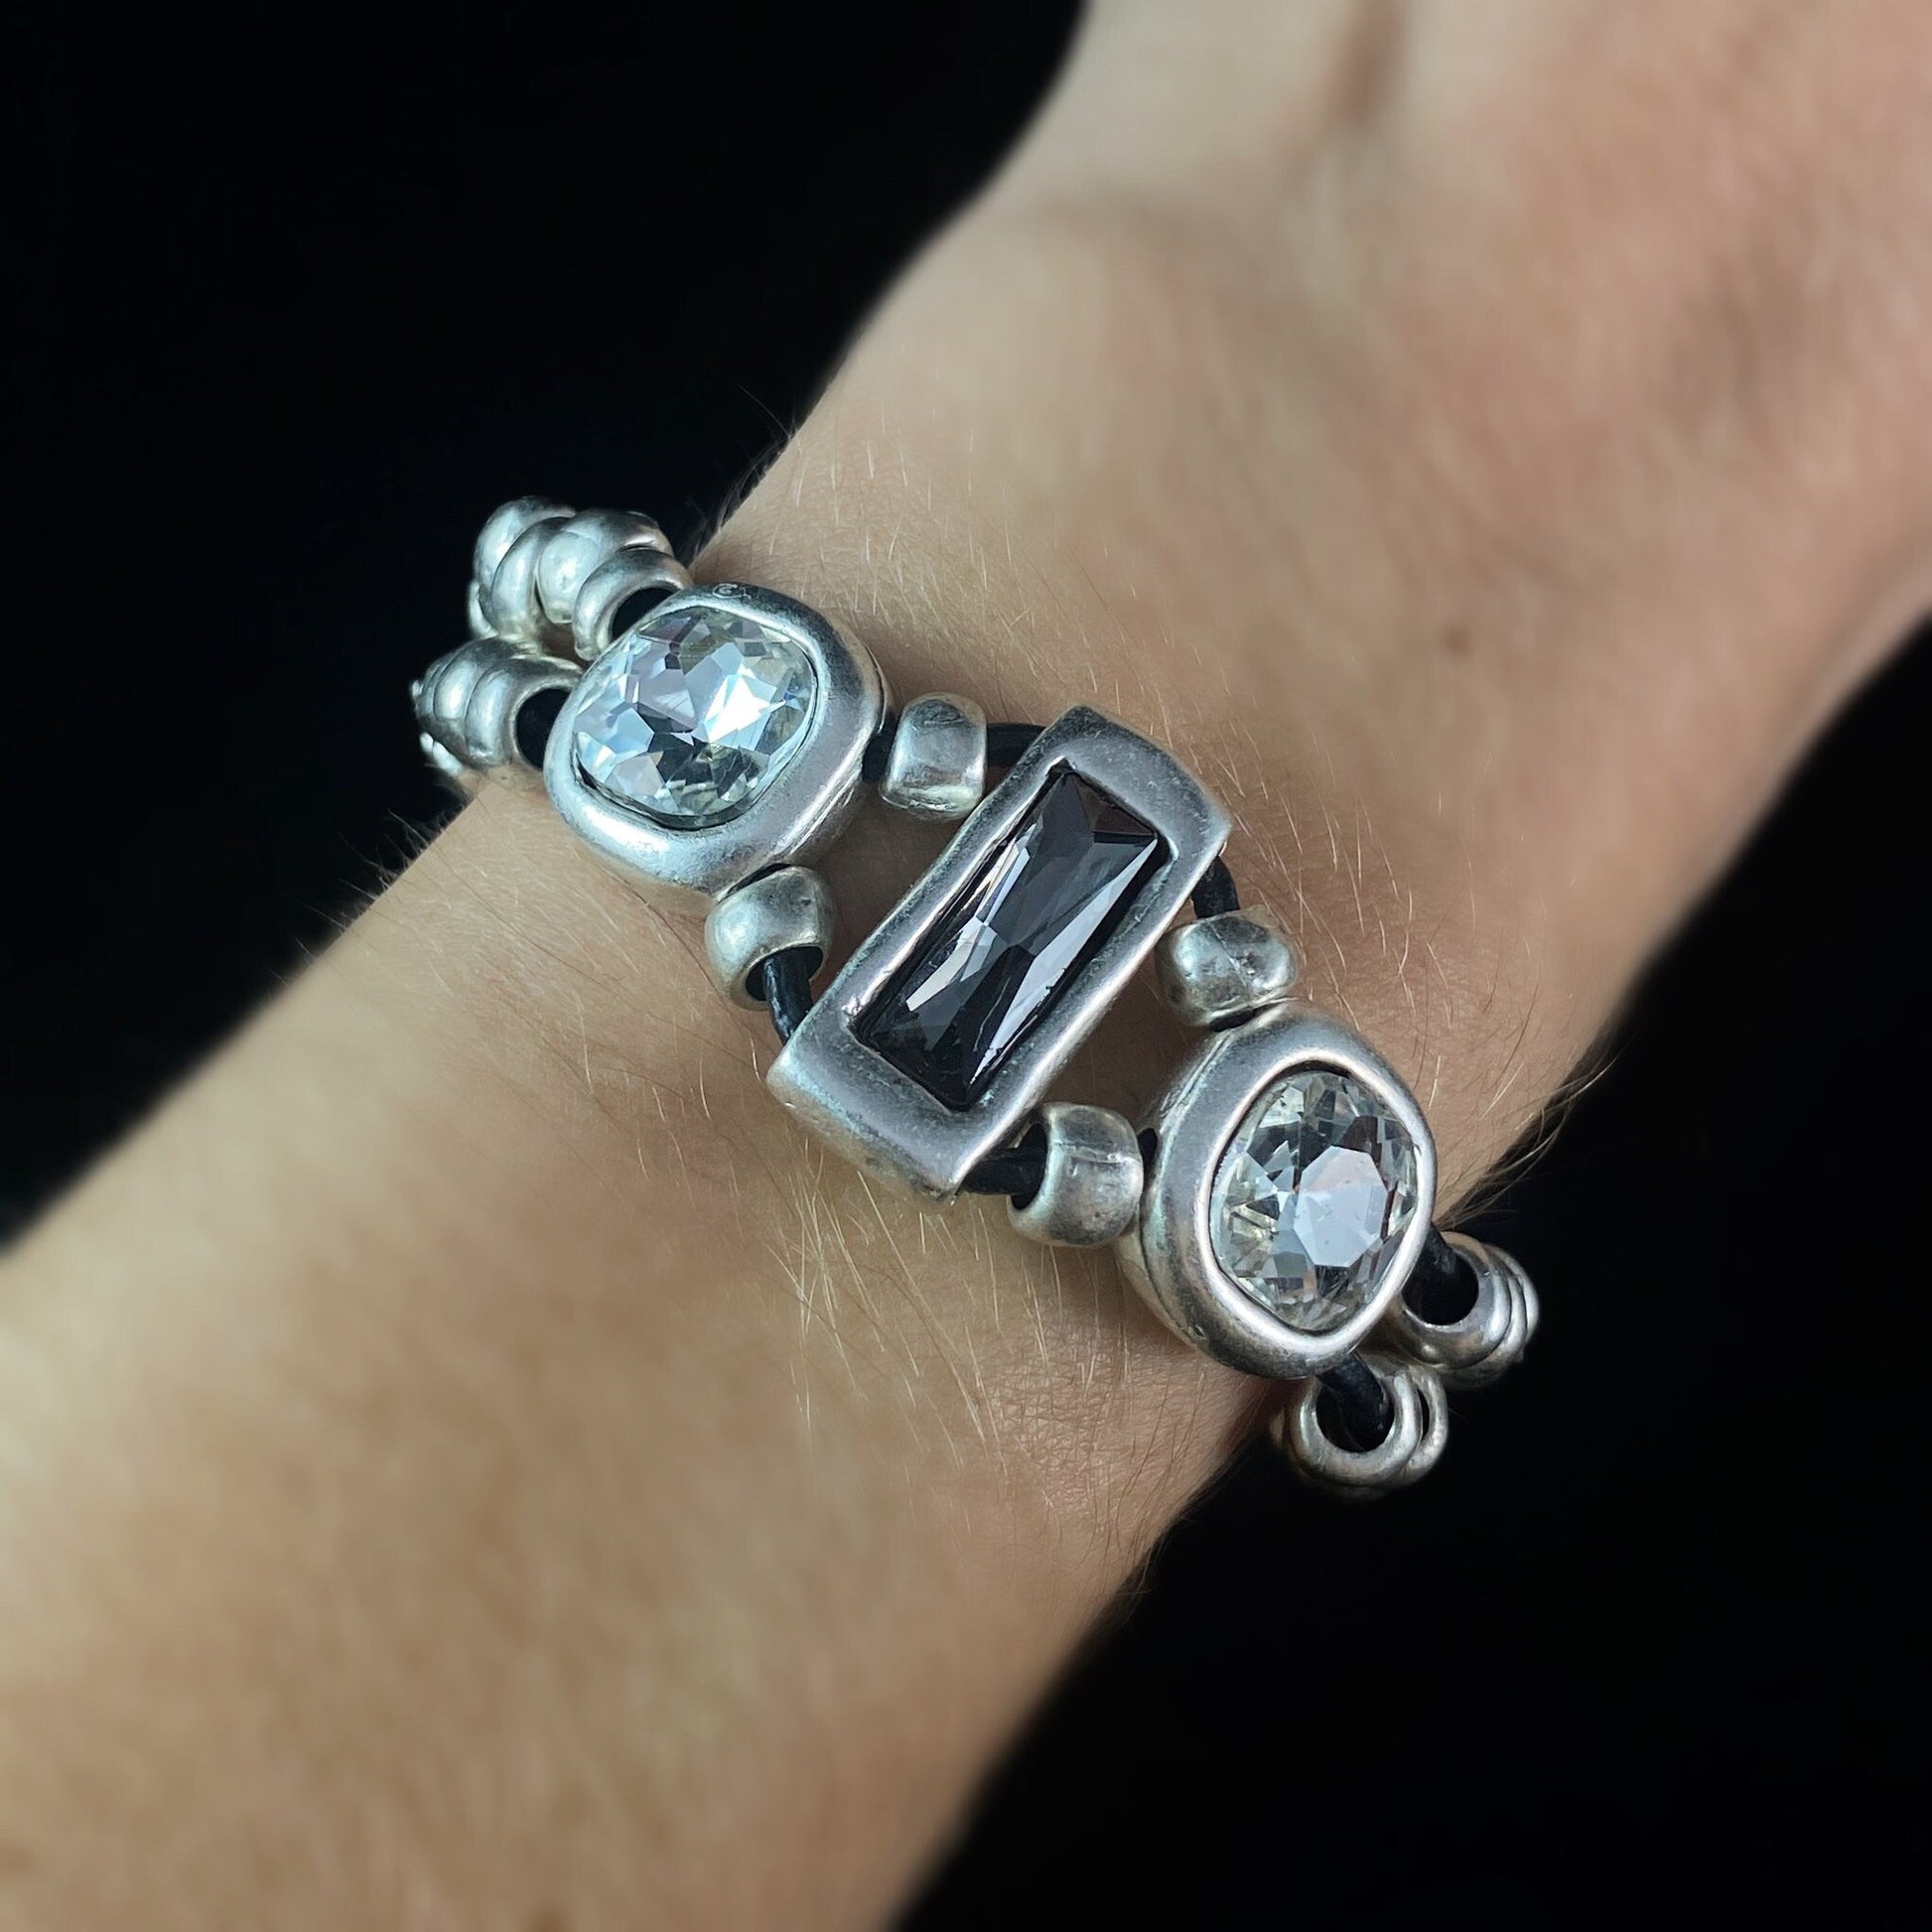 Crystal Bracelet with Round Silver Beads and Leather Closure, Handmade, Nickel Free-Noir